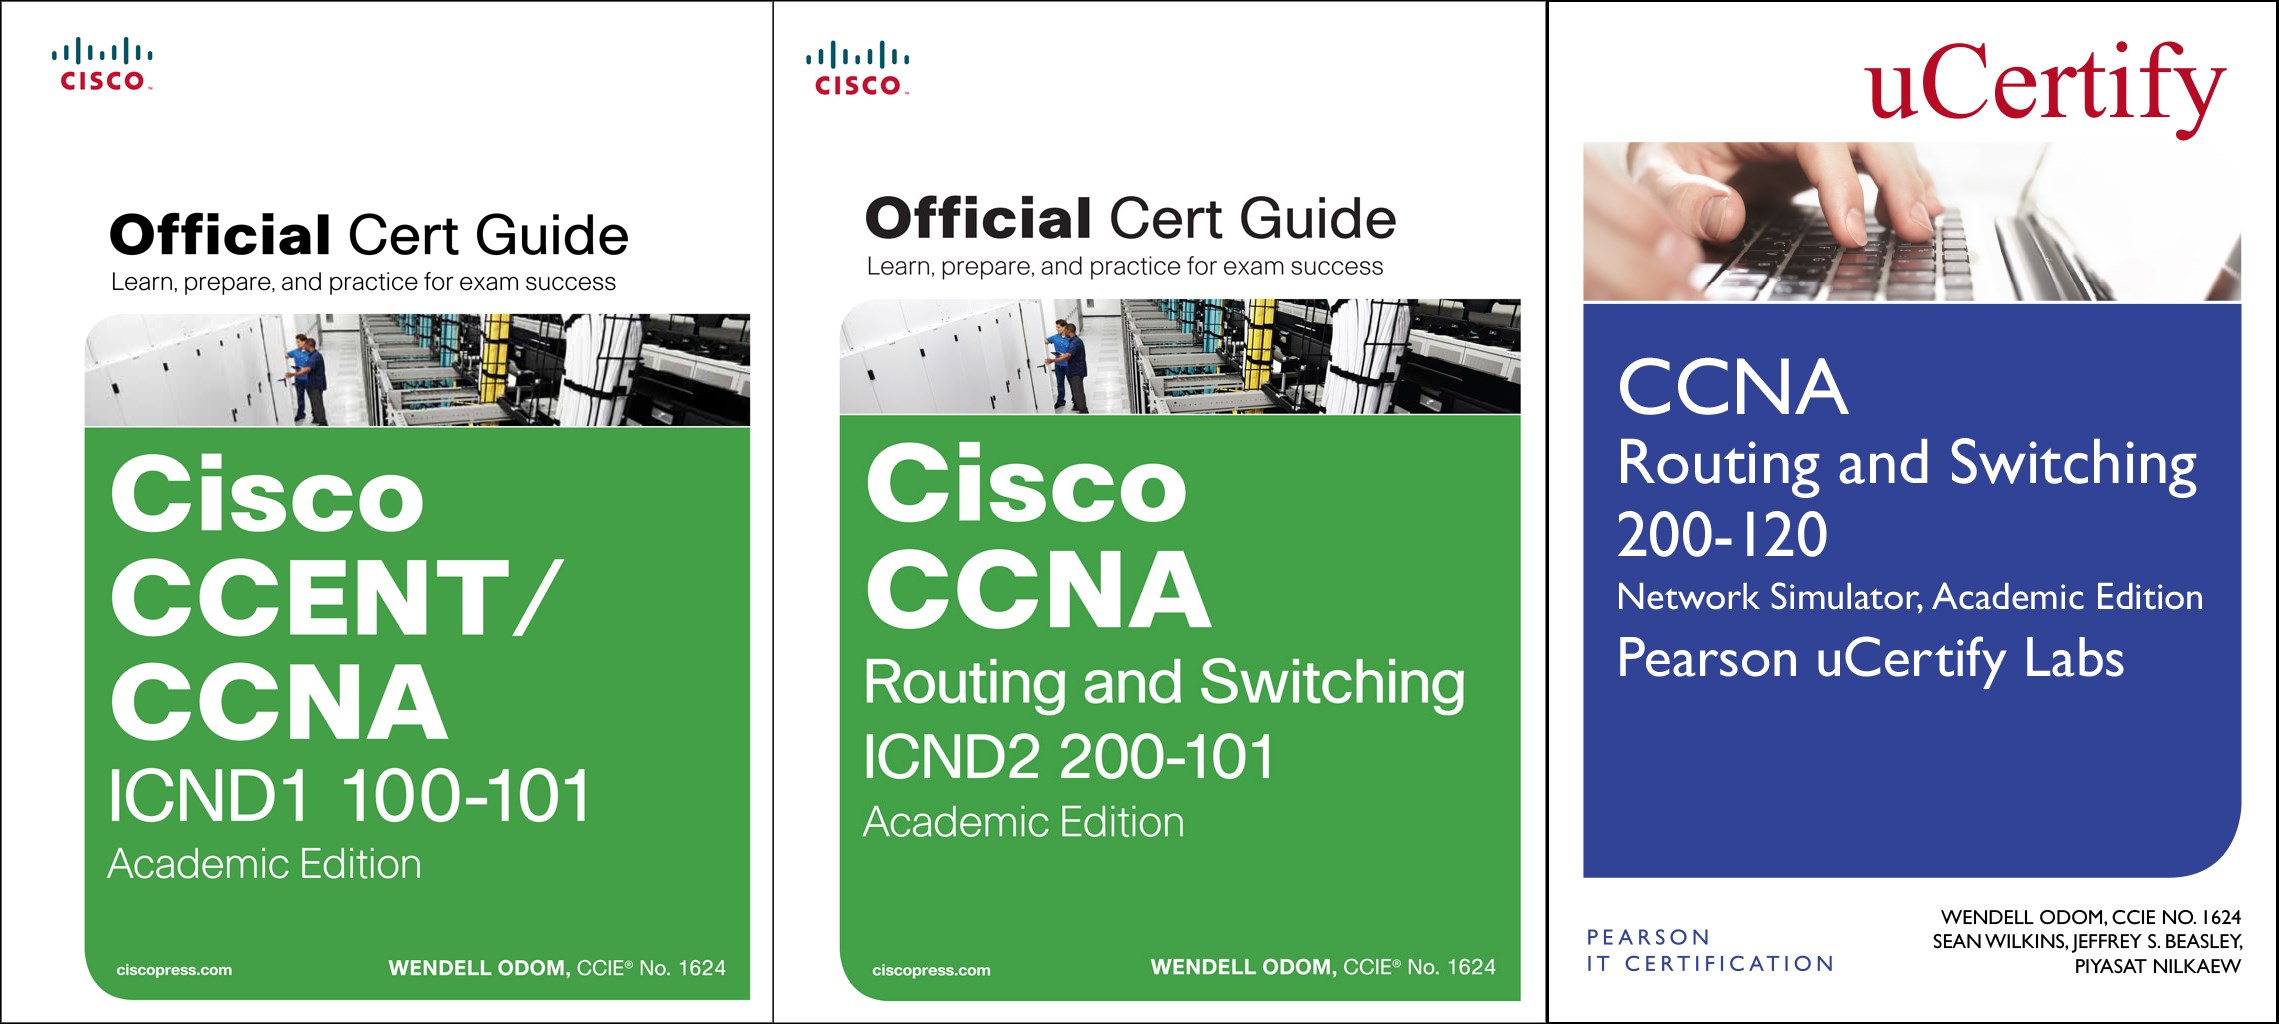 CCNA R&S 200-120 Official Cert Guide Academic Edition Library and Network Simulator Bundle